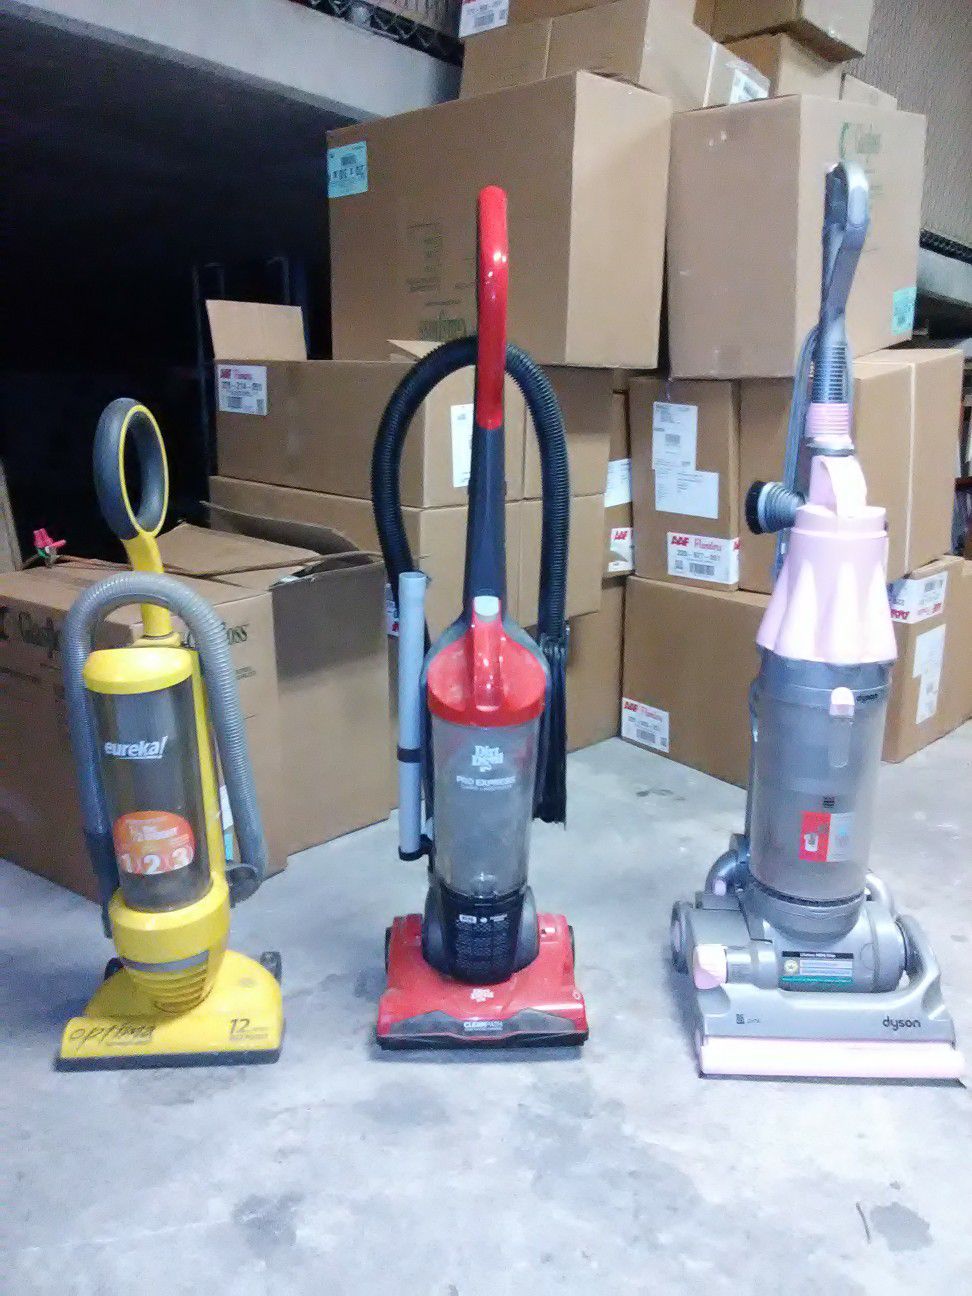 3 Upright Vacuum Cleaners